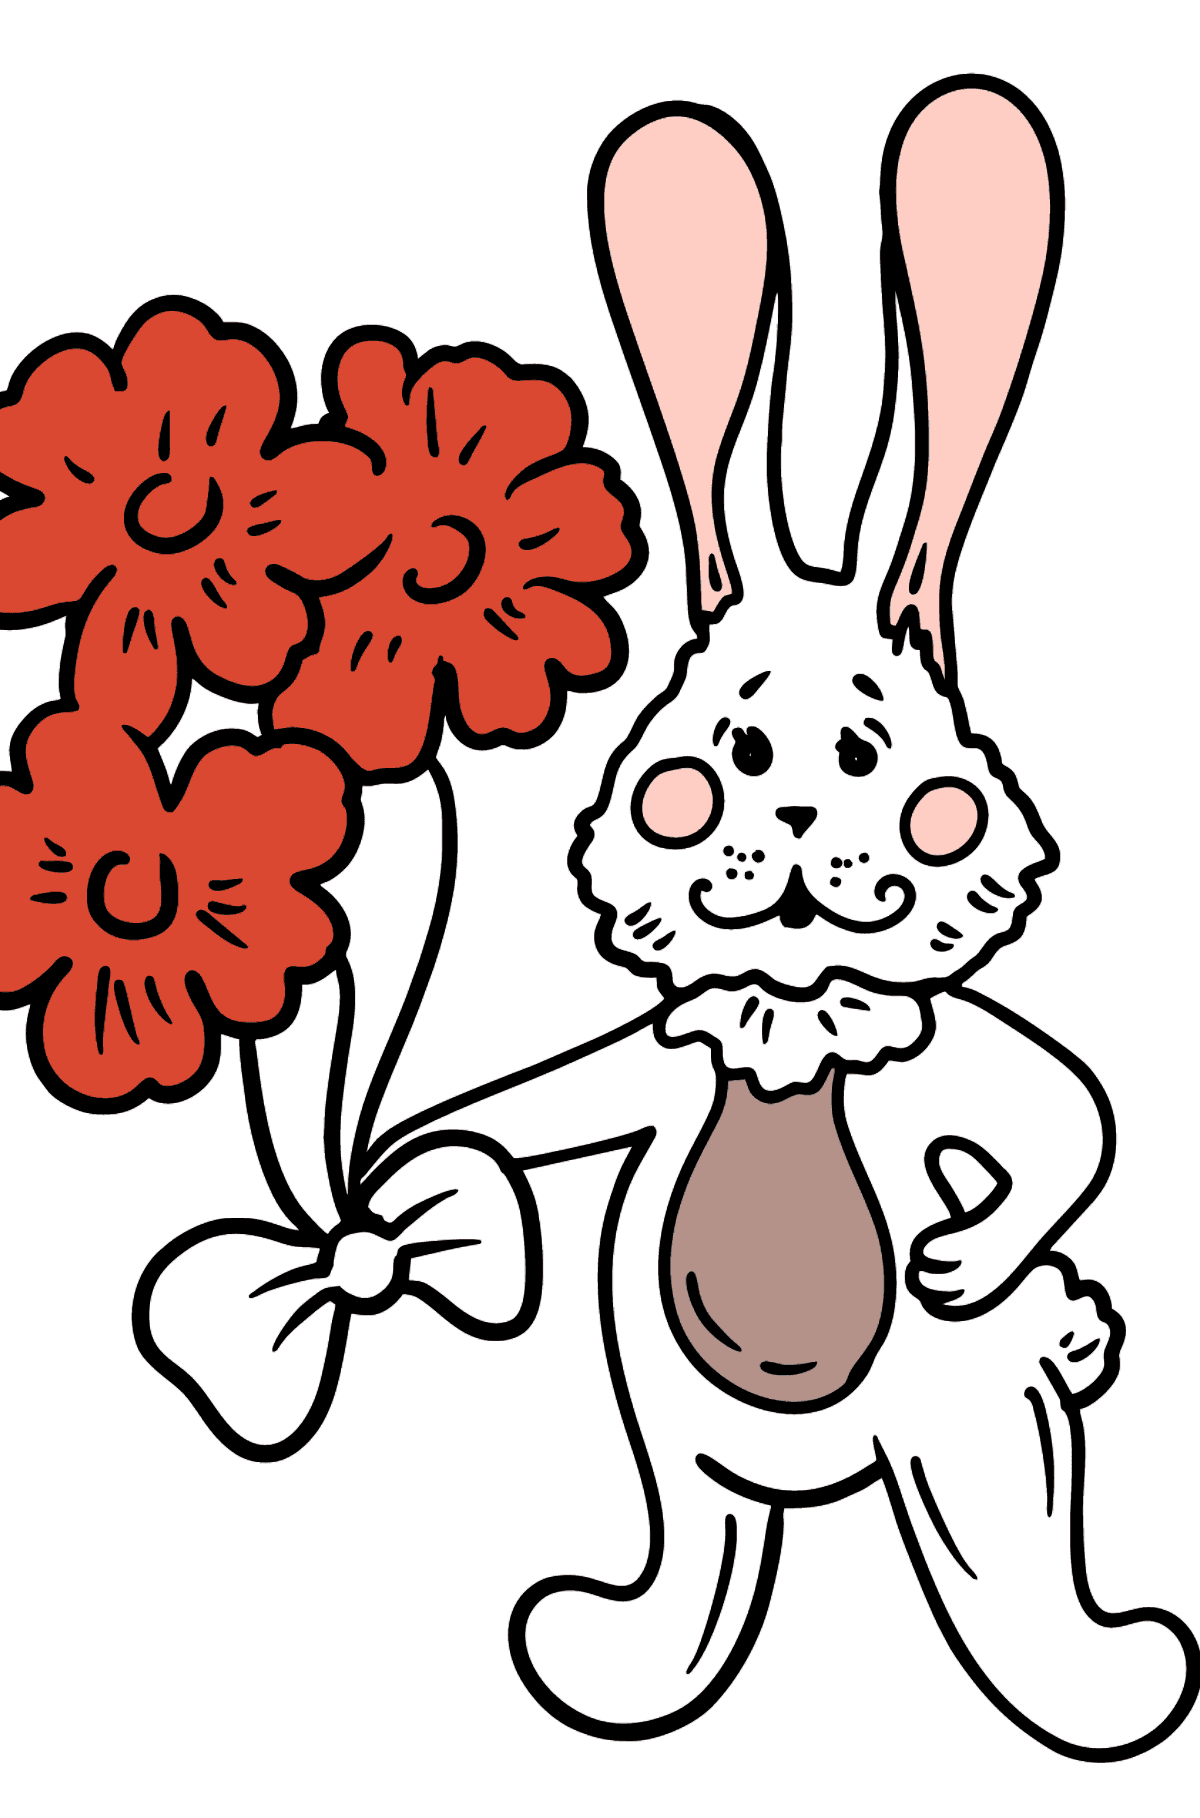 Bunny with a Bouquet of Flowers coloring page - Coloring Pages for Kids